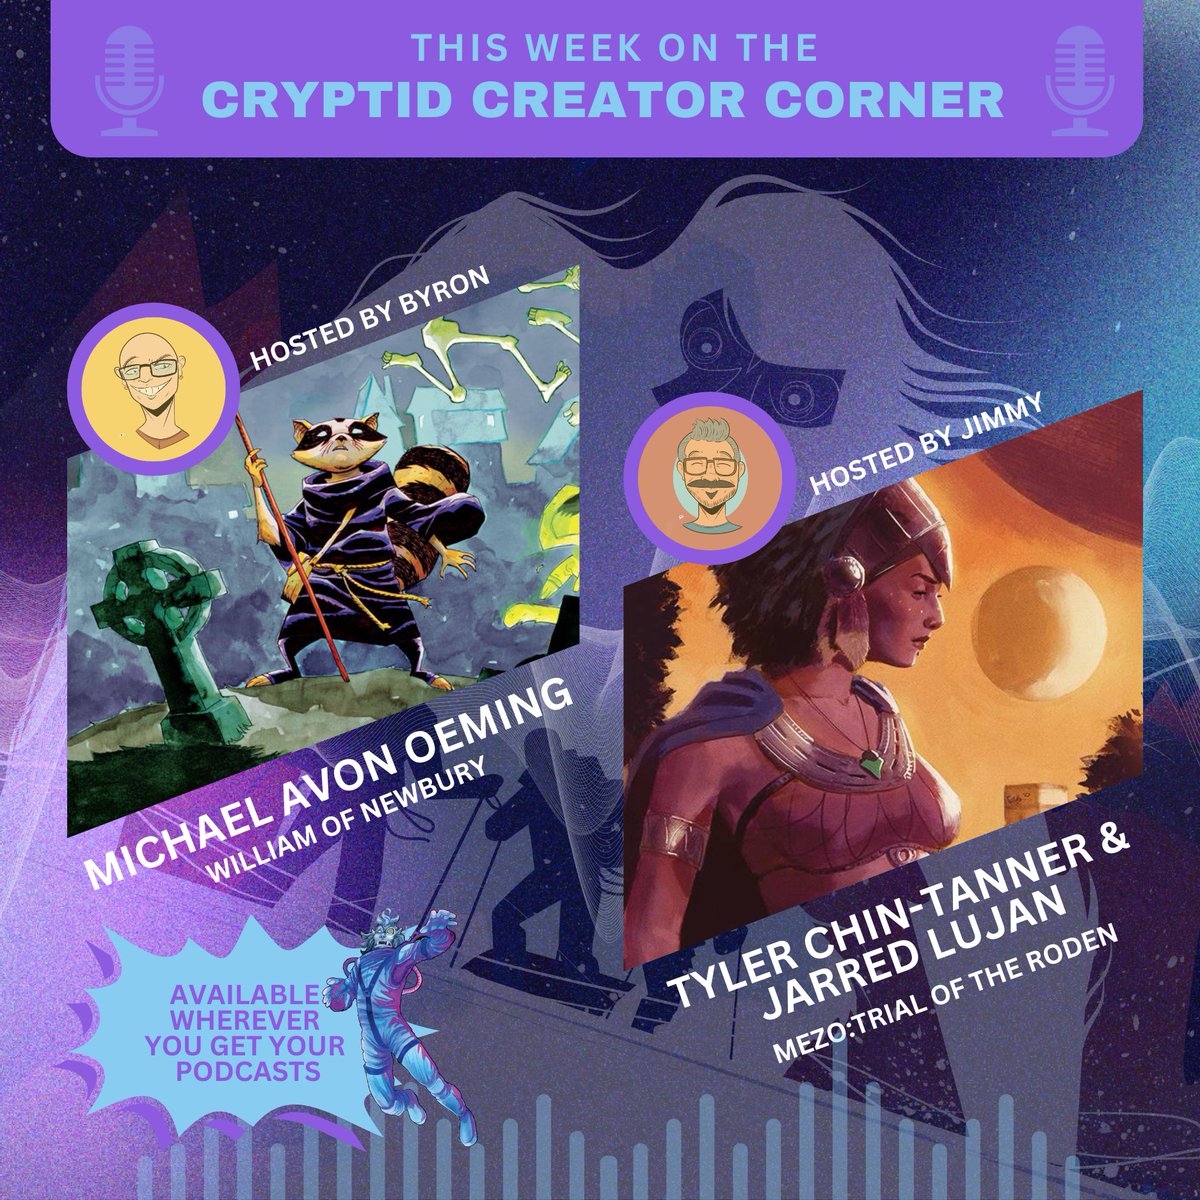 This week on The Cryptid Creator Corner podcast @TylerChinTanner @jarredlujan and @Oeming visit the show to talk about their new projects. Available at cryptidcreatorcorner.com or wherever you get your podcasts.